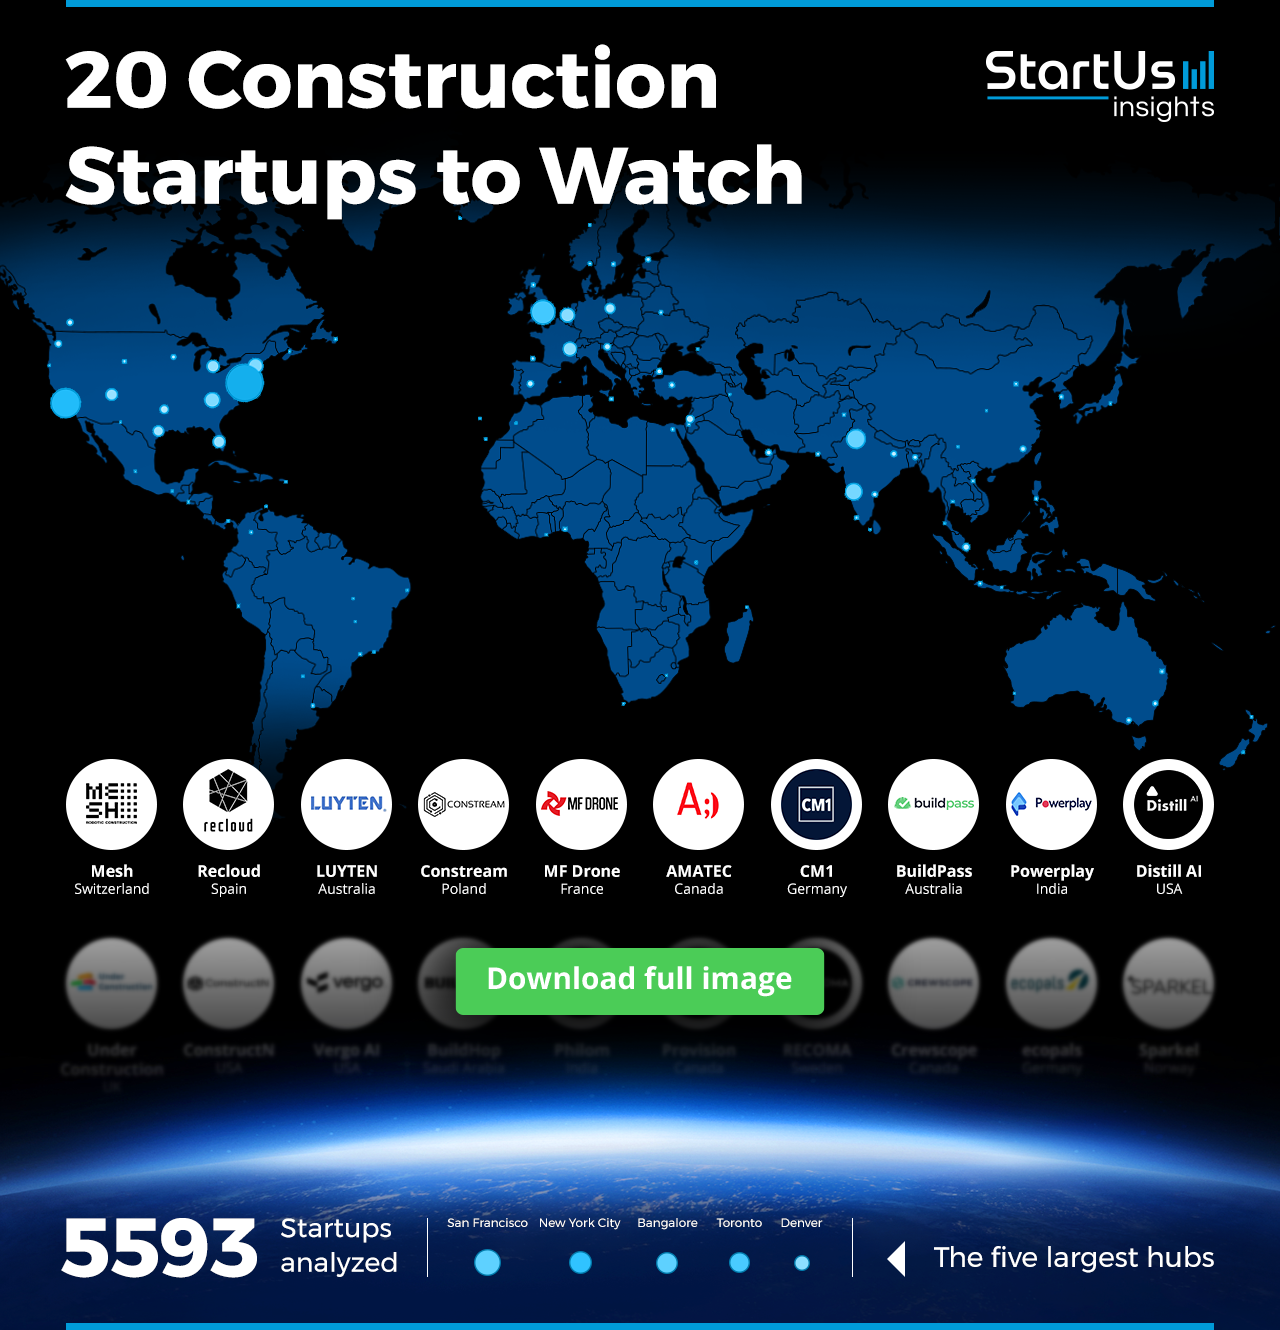 Construction-Startups-to-Watch-Heat-Map-Blurred-StartUs-Insights-noresize